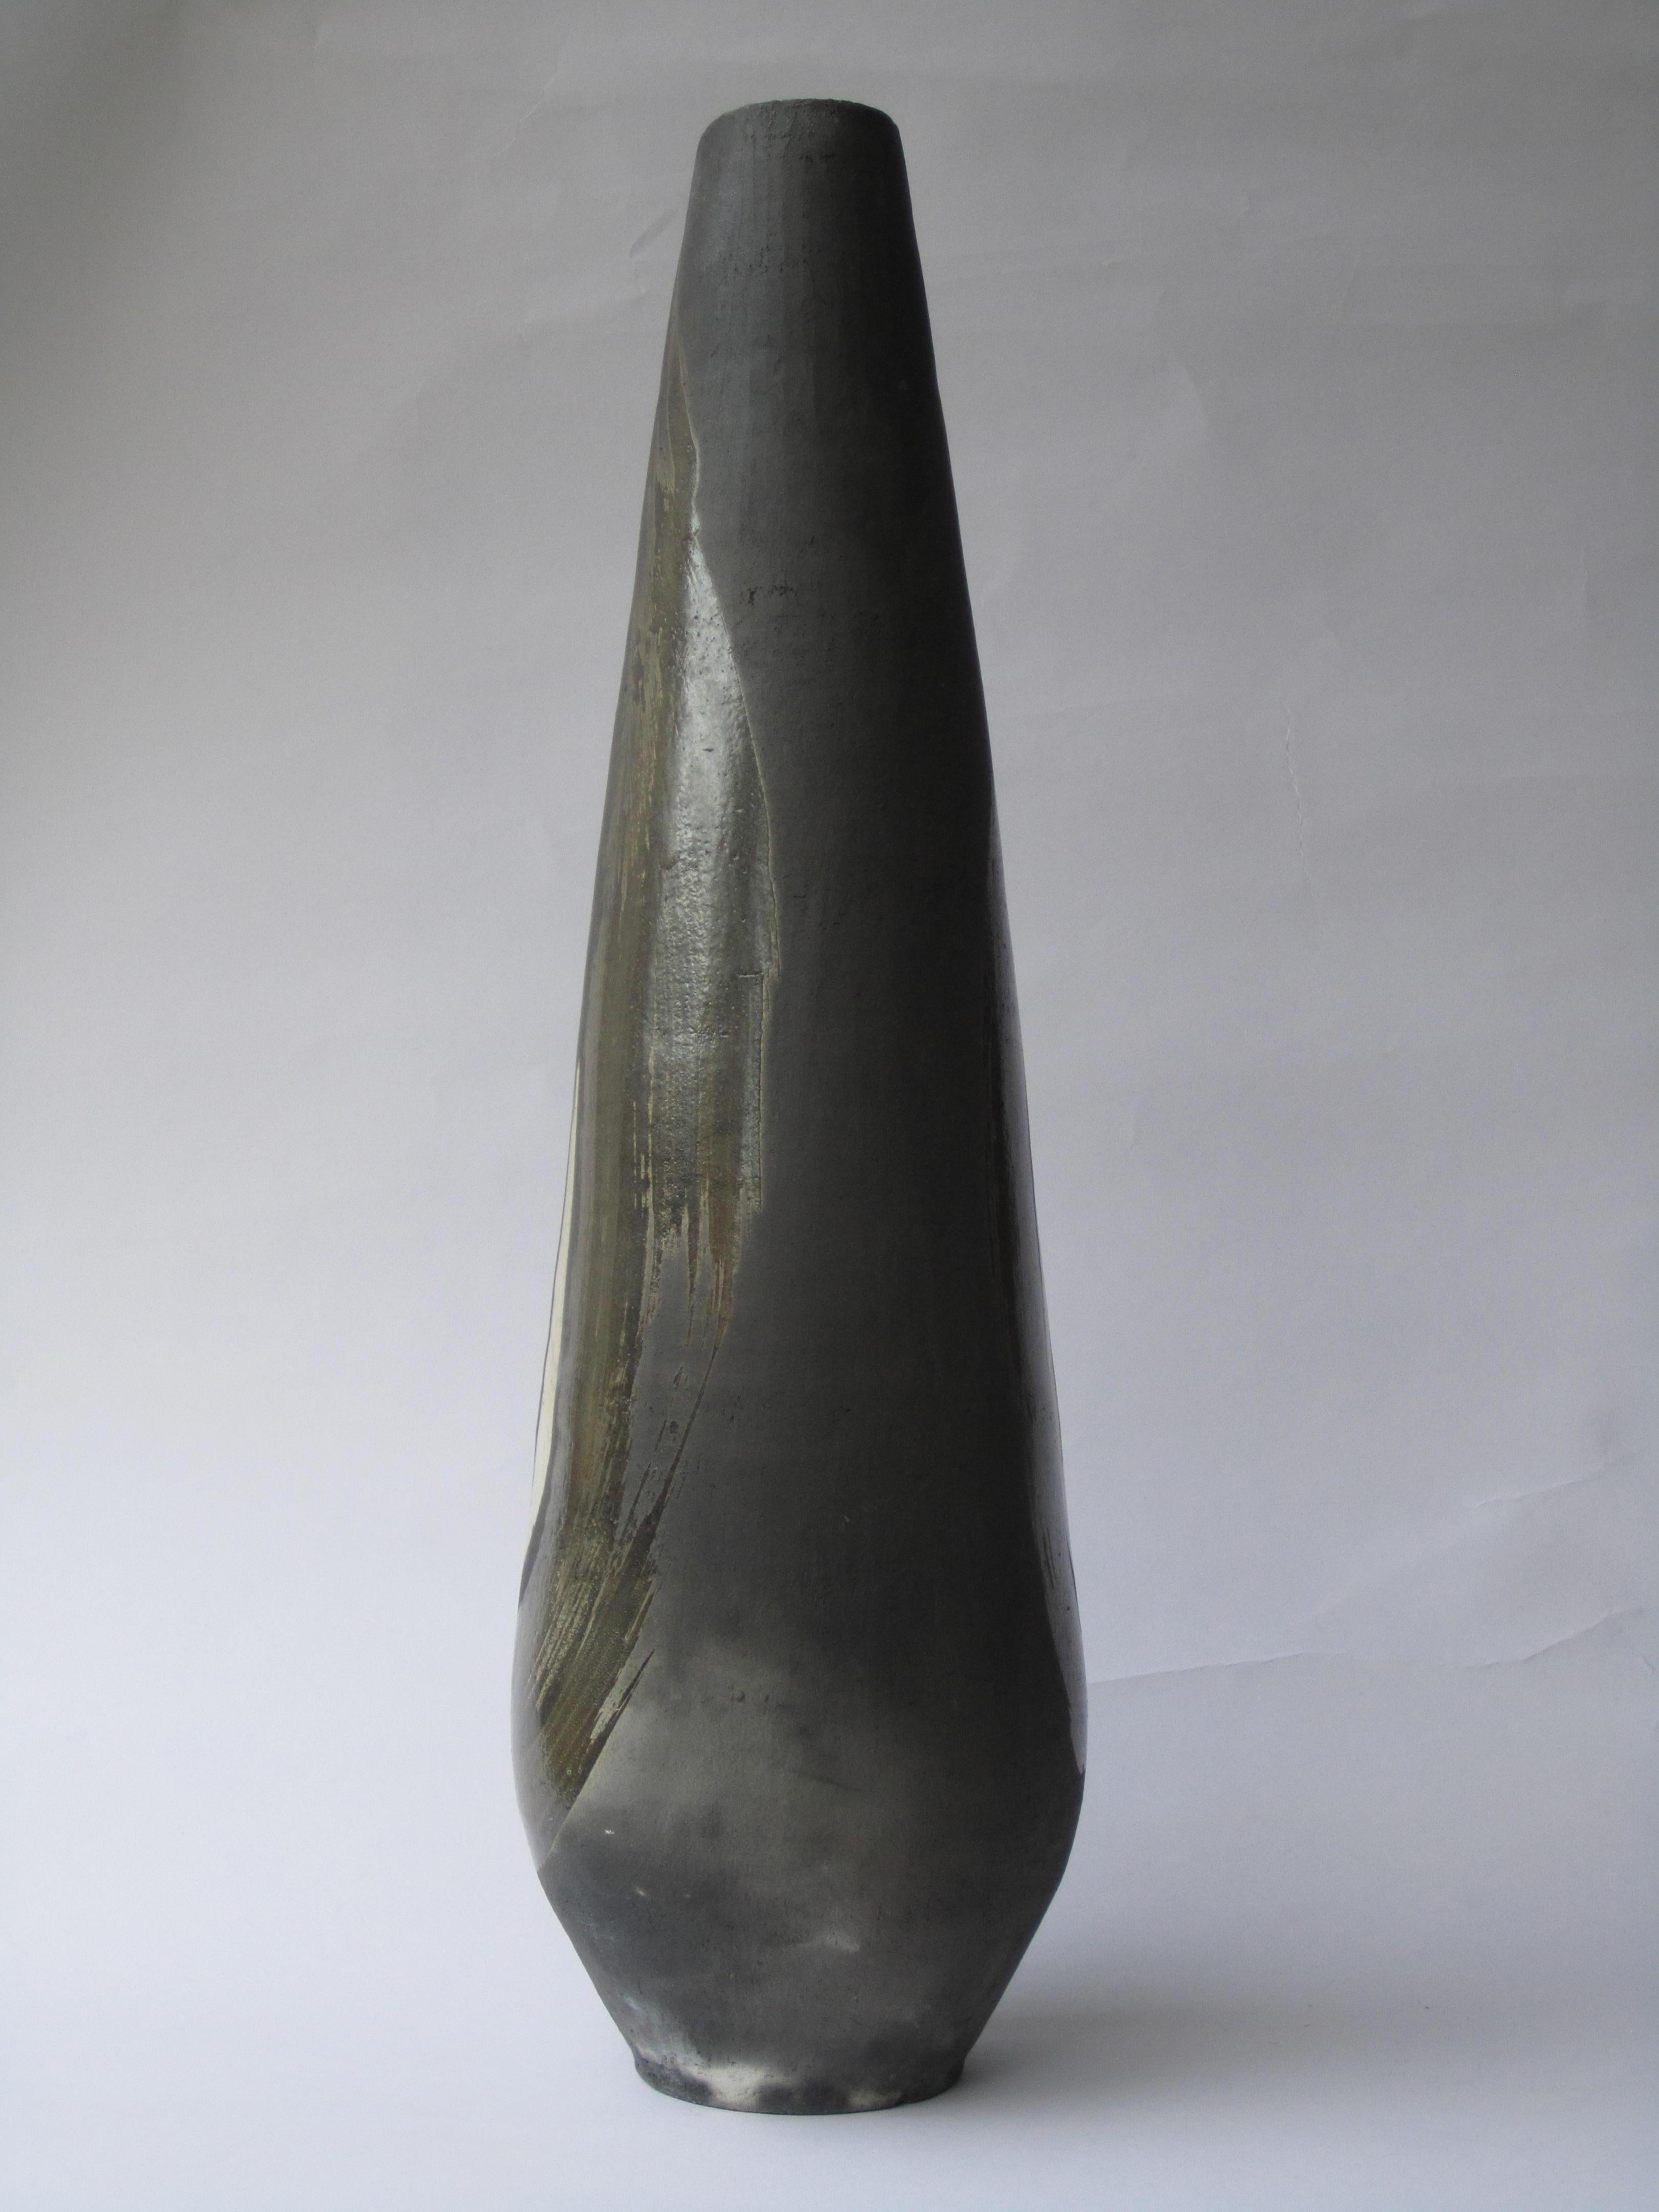 Genesis III is a raku fired handmade decorative high vase by artist Tien Wen.
The artist's work revolves around the idea of abstraction and the pureness of shapes. Thanks to the raku technique, the sculptures of this series (which represents the